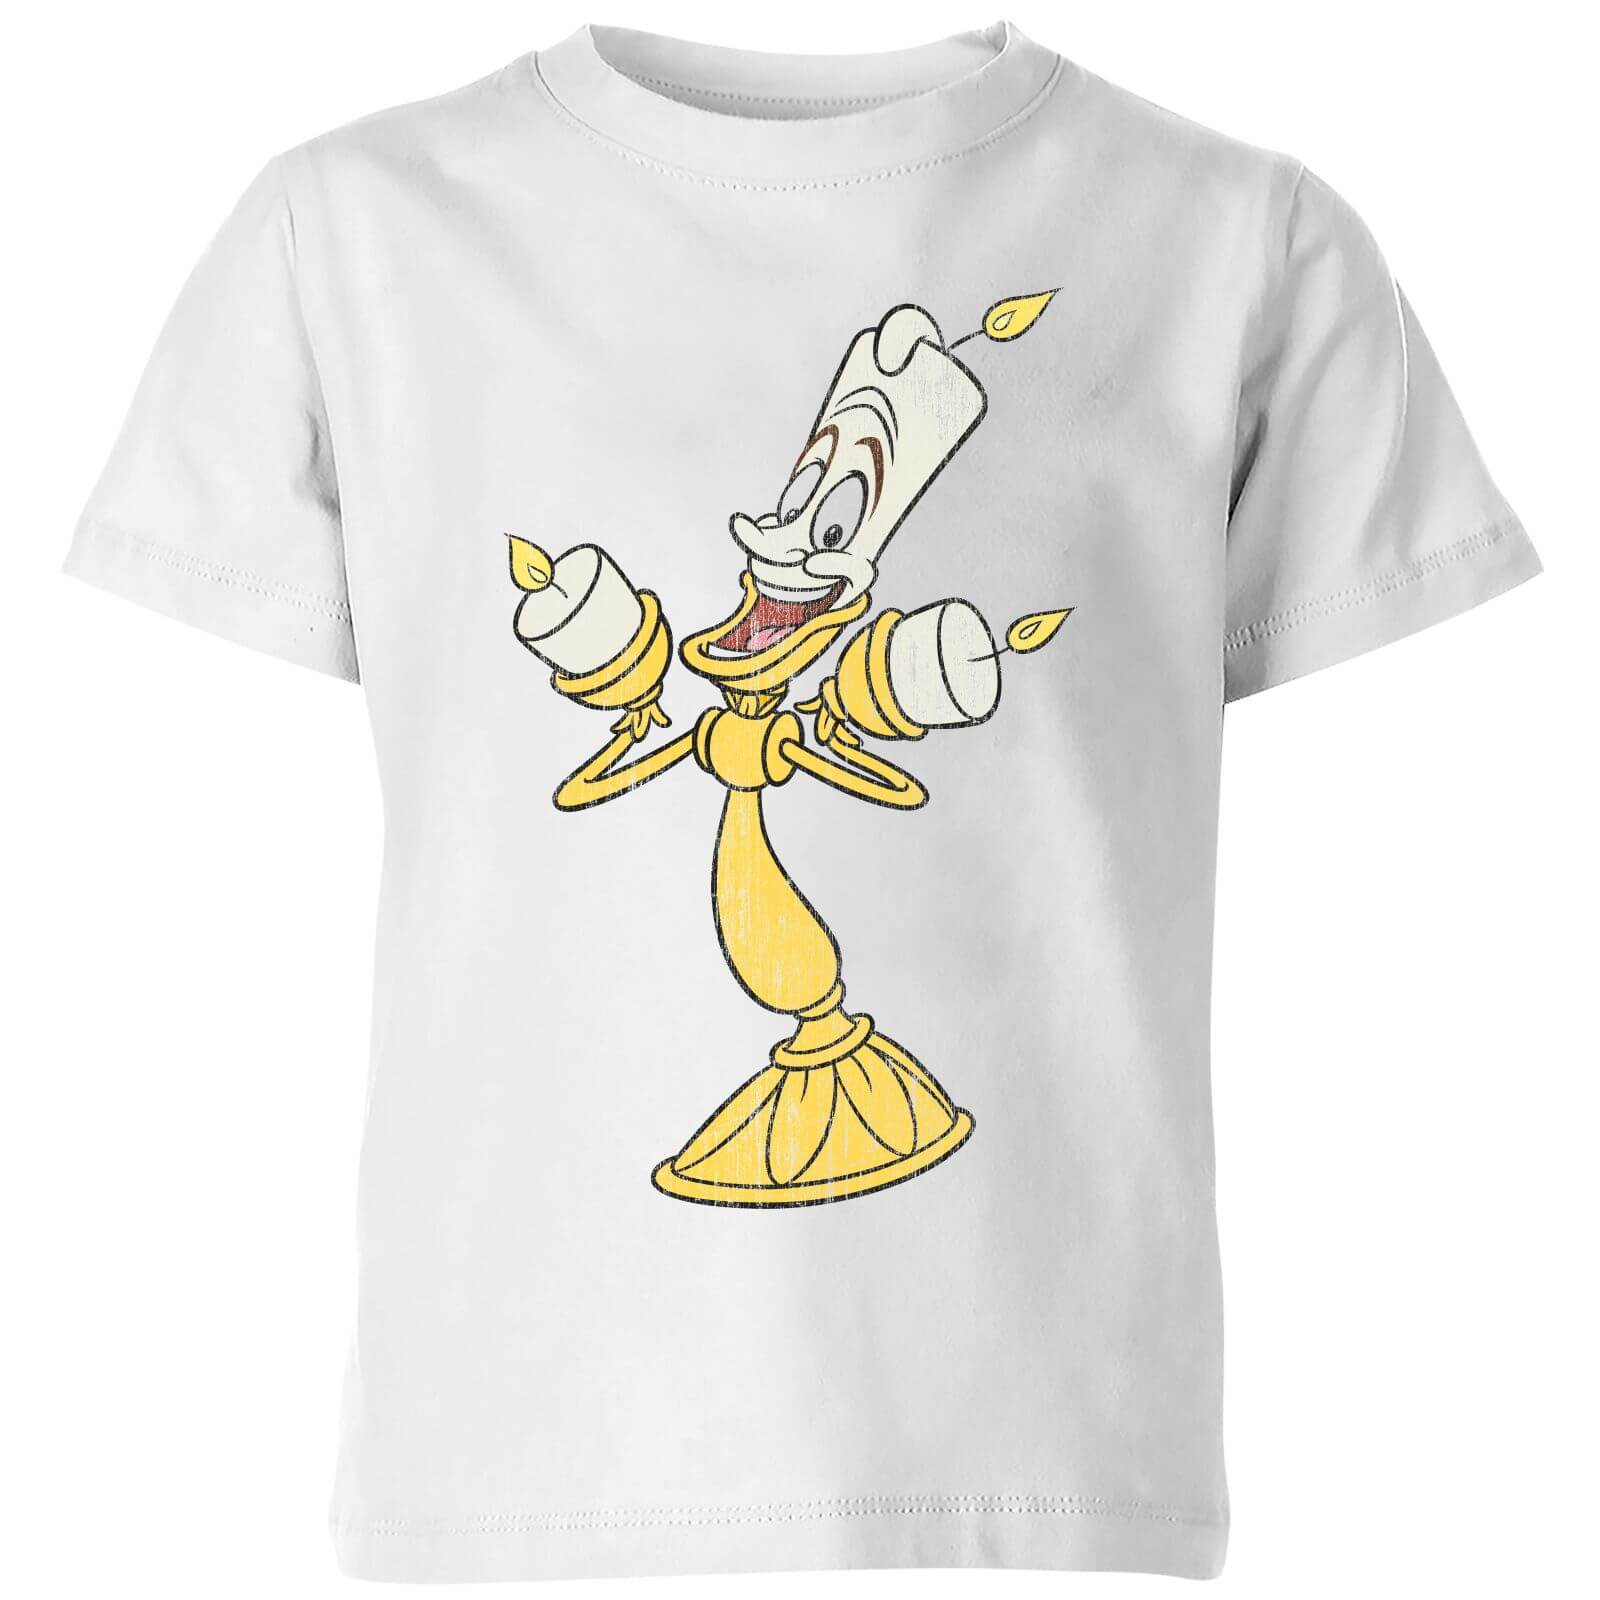 Disney Beauty And The Beast Lumiere Distressed Kids' T-Shirt - White - 5-6 Years - White